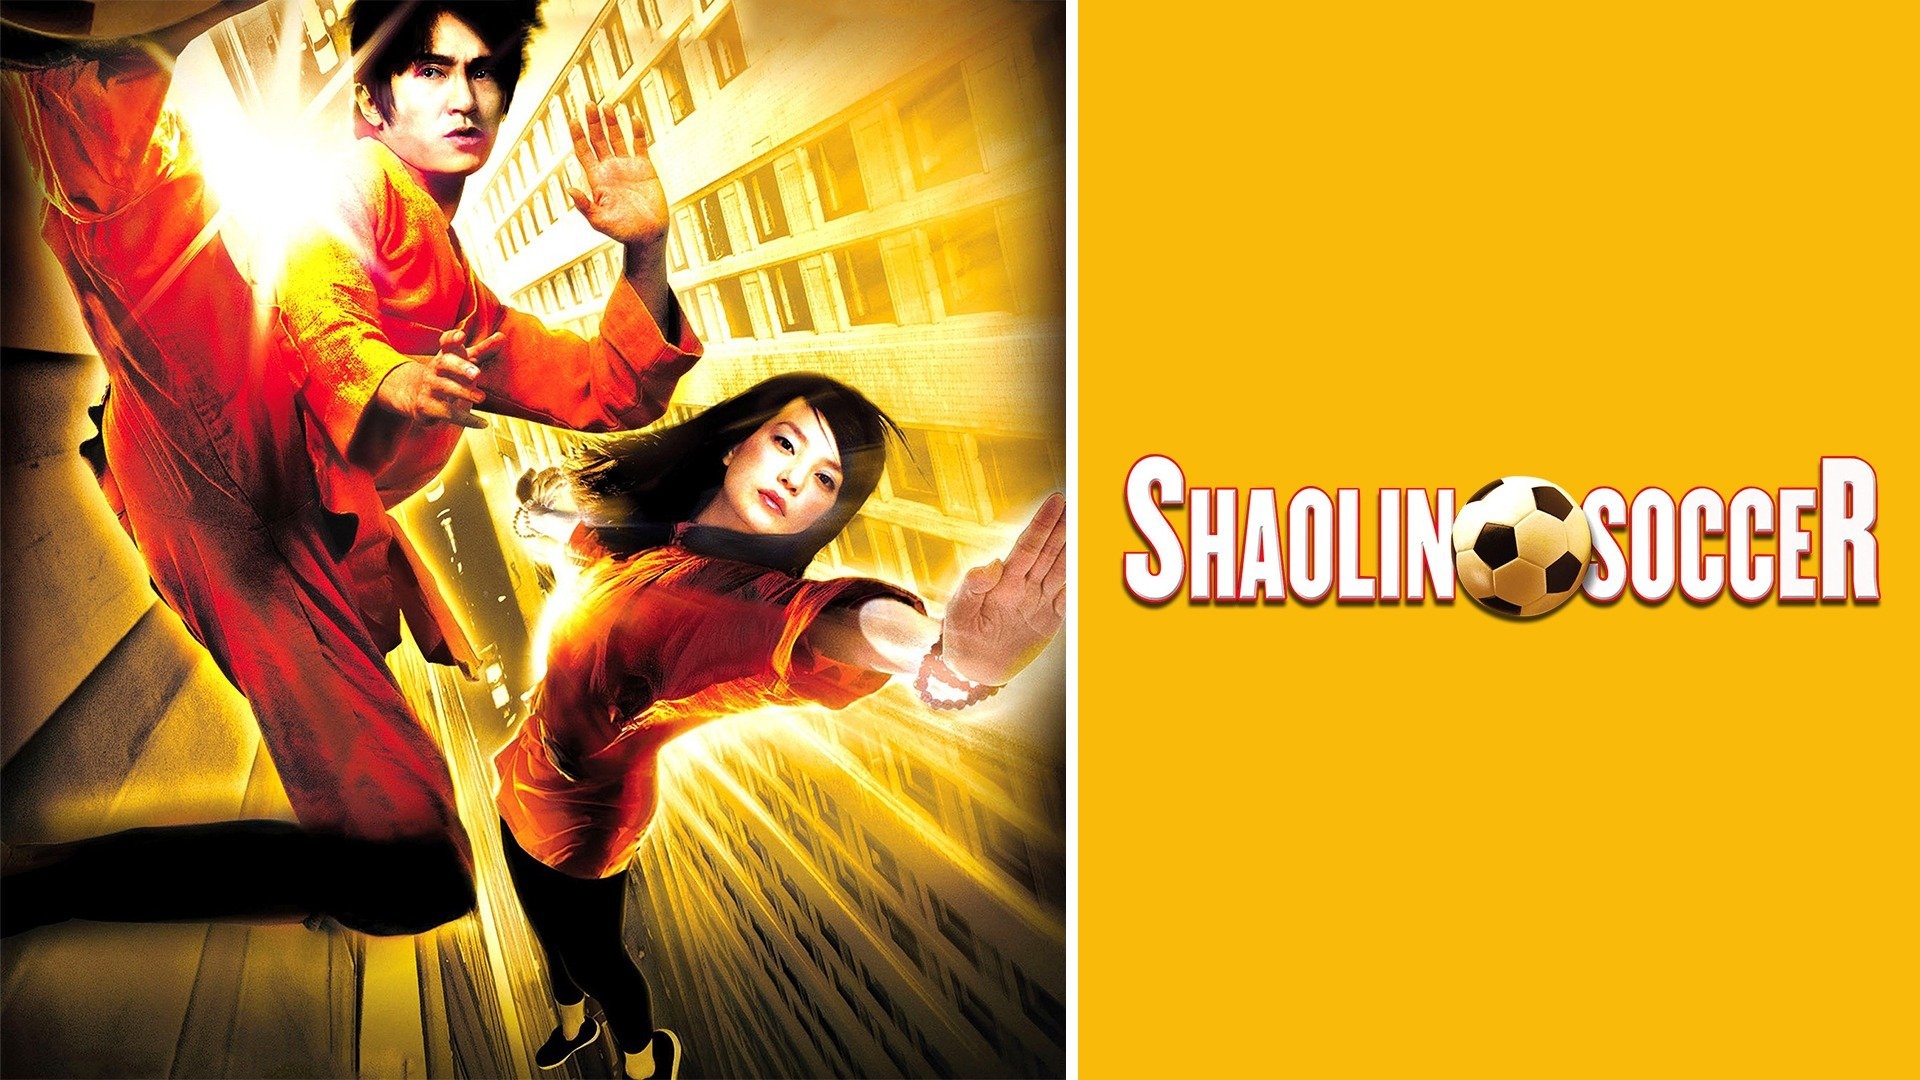 Shaolin Soccer: The top-grossing action comedy in Hong Kong history. 1920x1080 Full HD Background.